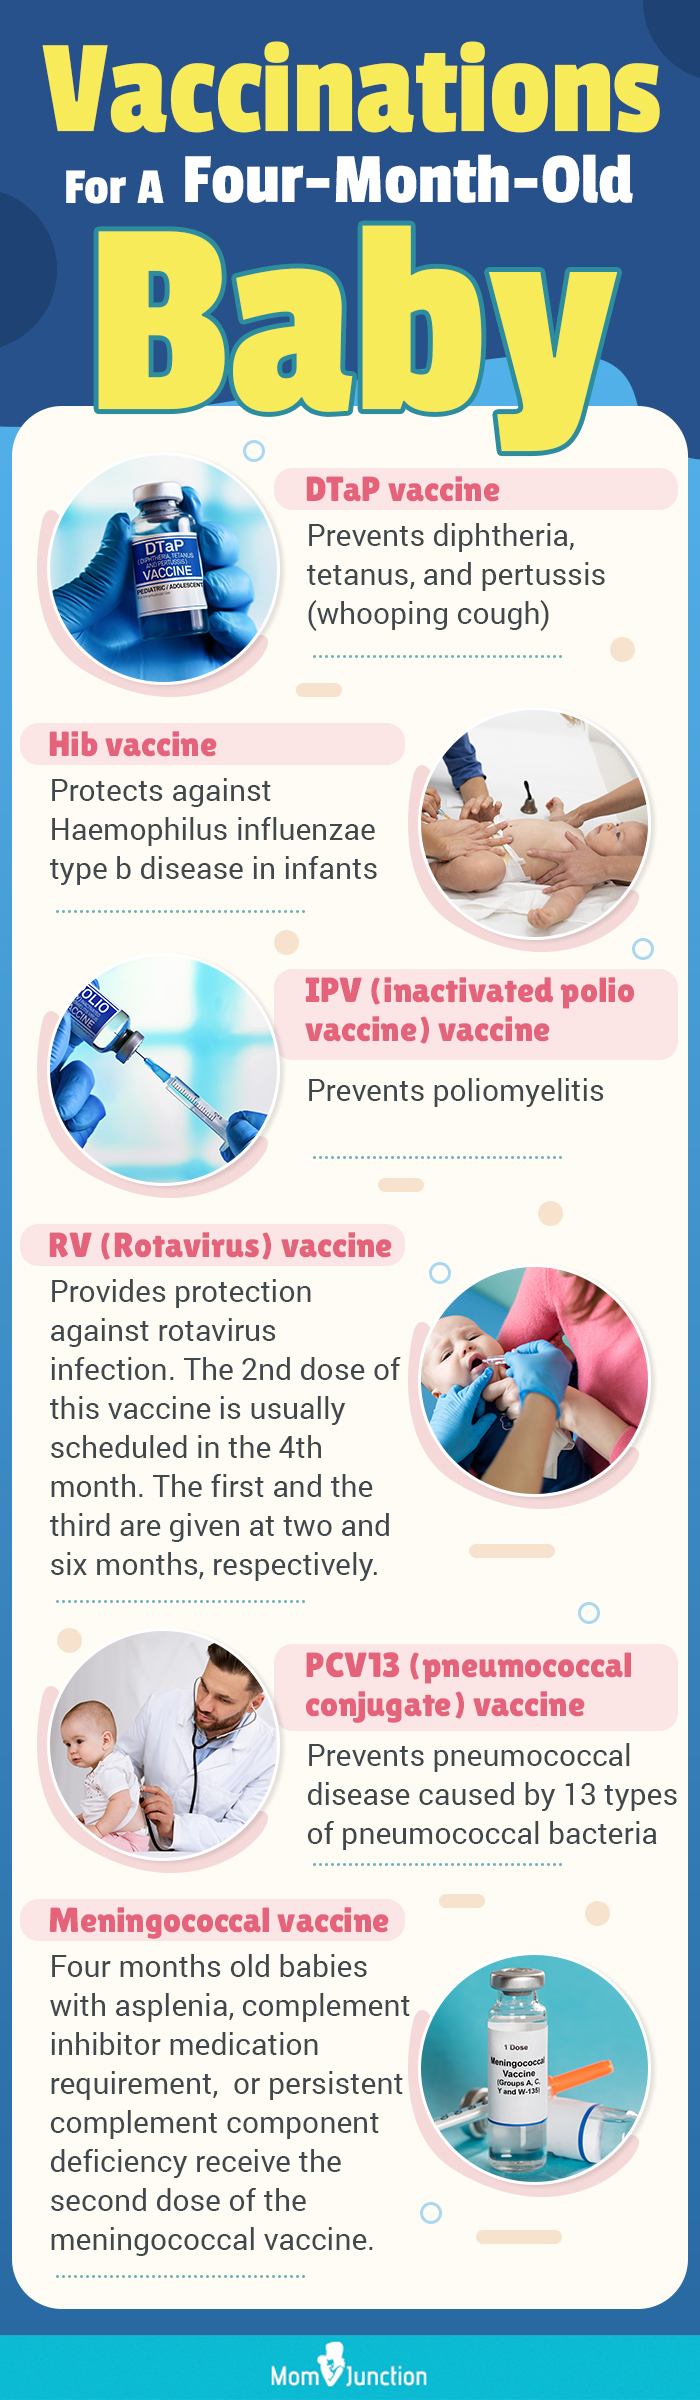 vaccinations for a four month old baby(infographic)